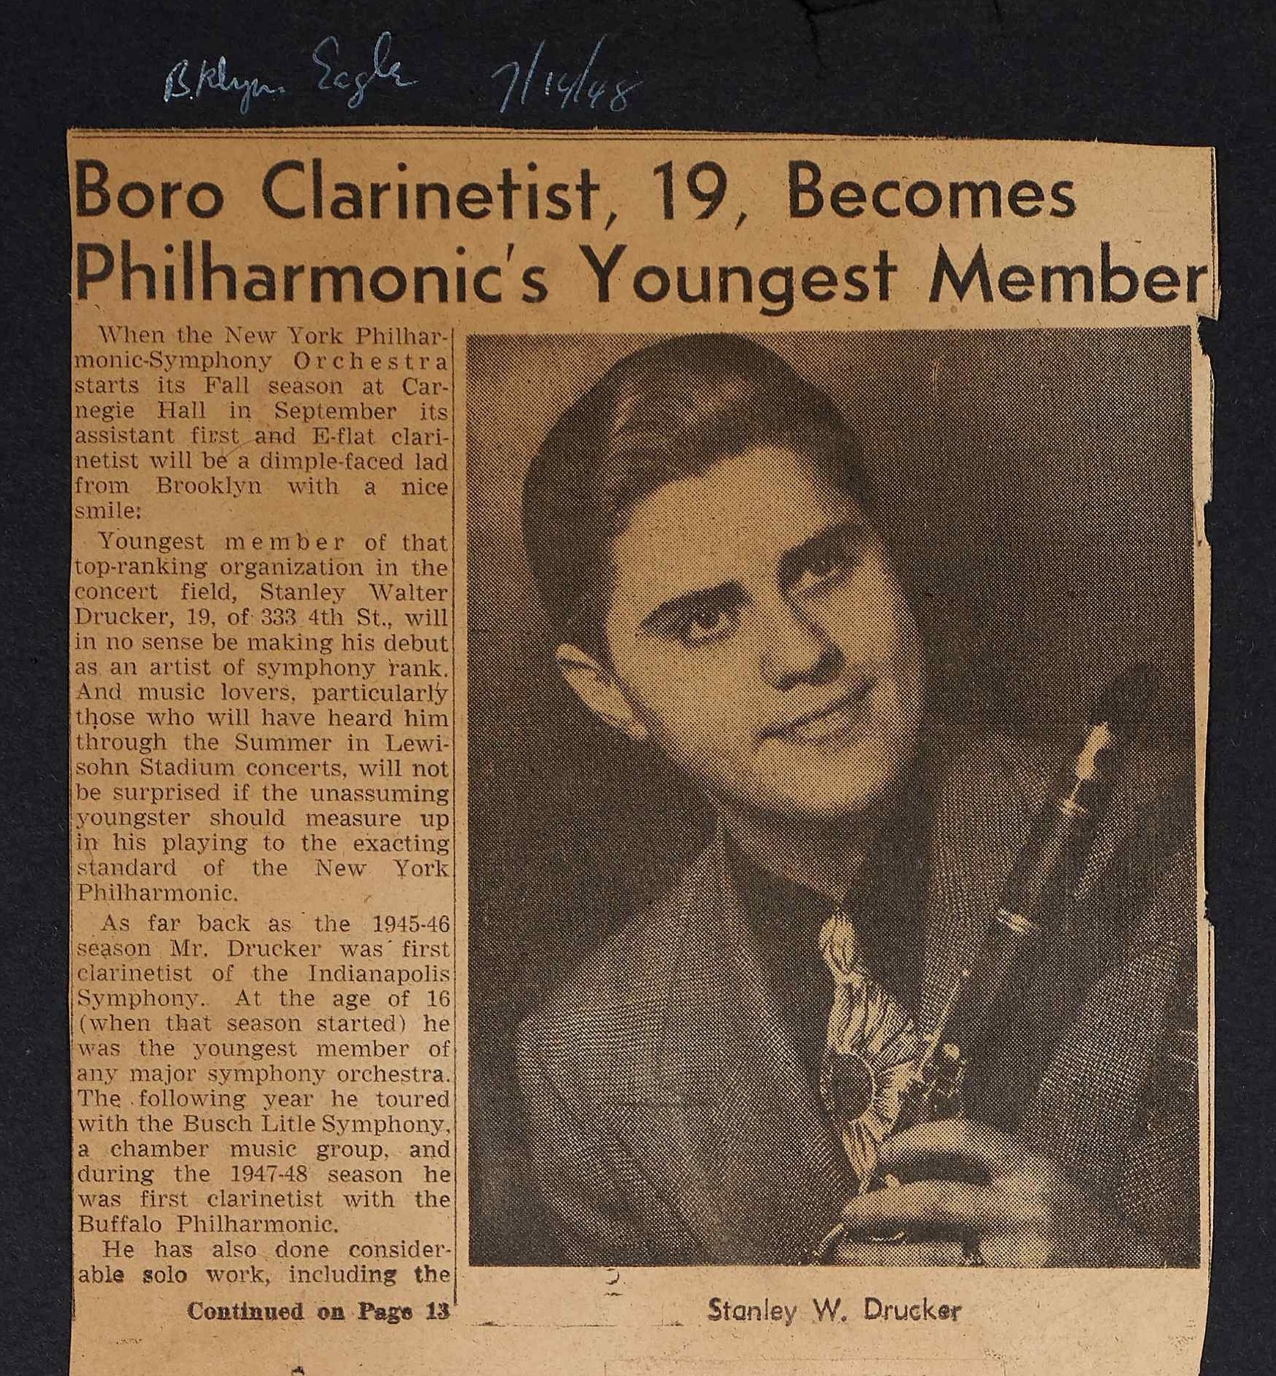 Press clipping from the Brooklyn Eagle, dated July 14, 1948. Headline: Boro Clarinetist, 19, Becomes Philharmonic's Youngest Member. A young Stanley Drucker is pictured.